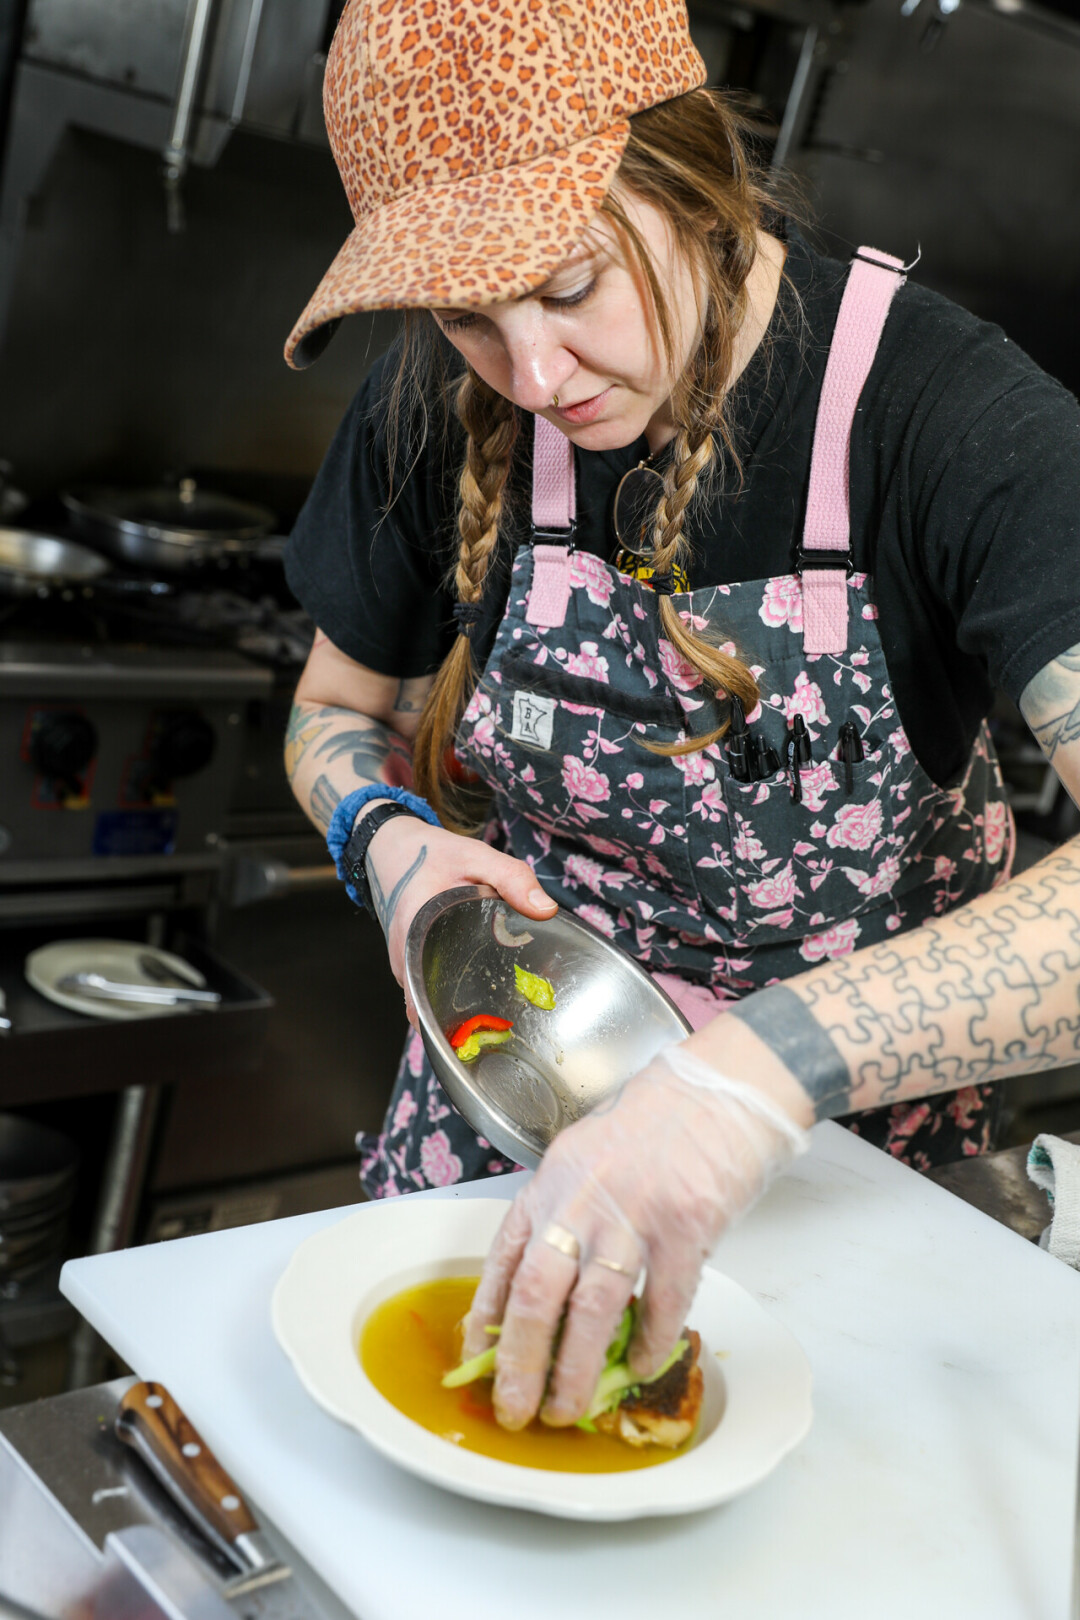 Head Chef and Owner, Ella Wesenberg, pictured above.